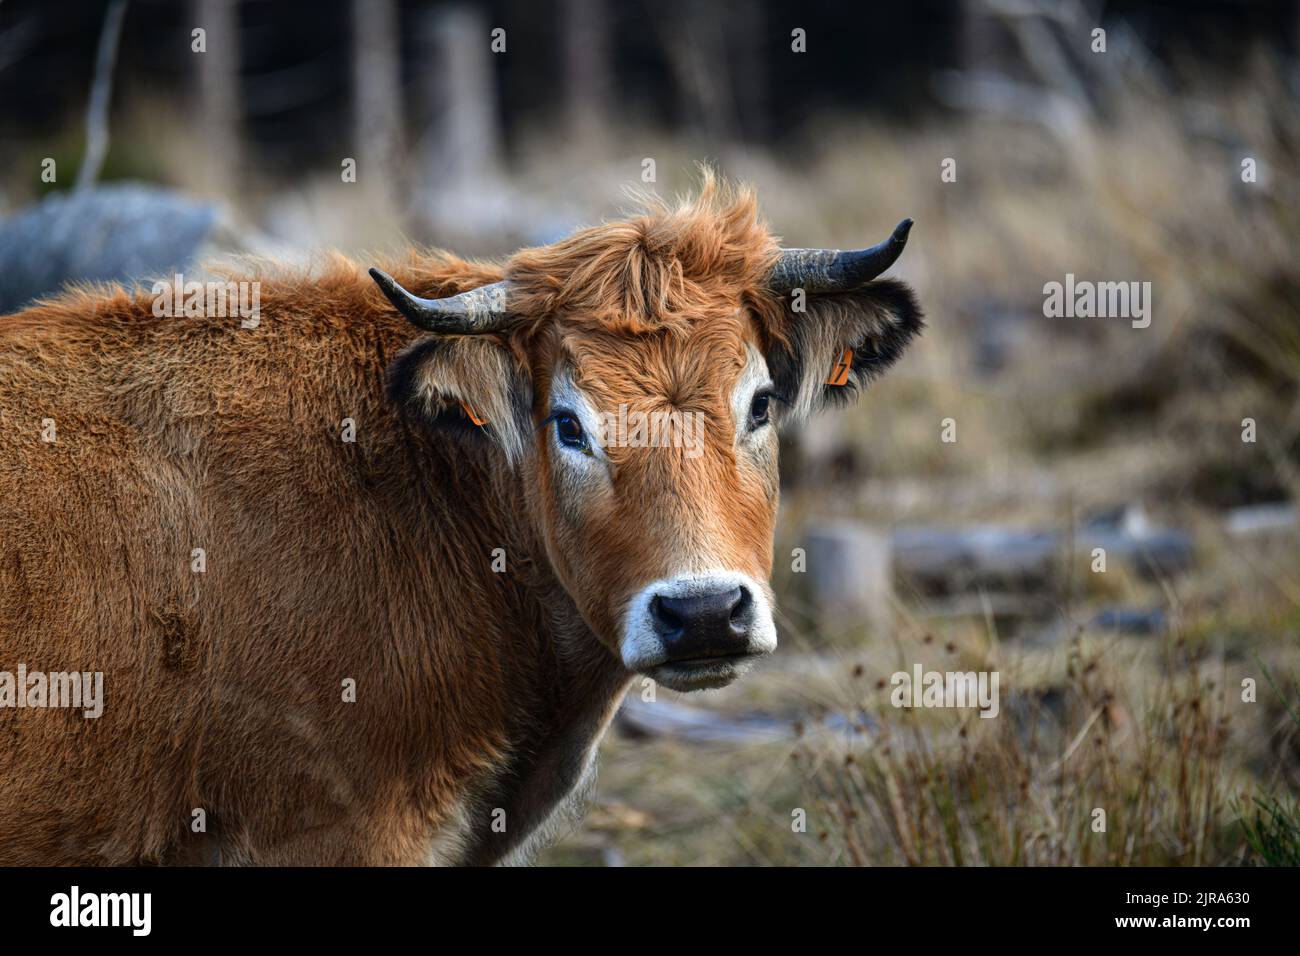 Haute-Loire department (south-central France): Aubrac cow in an undergrowth, three-quarter view Stock Photo